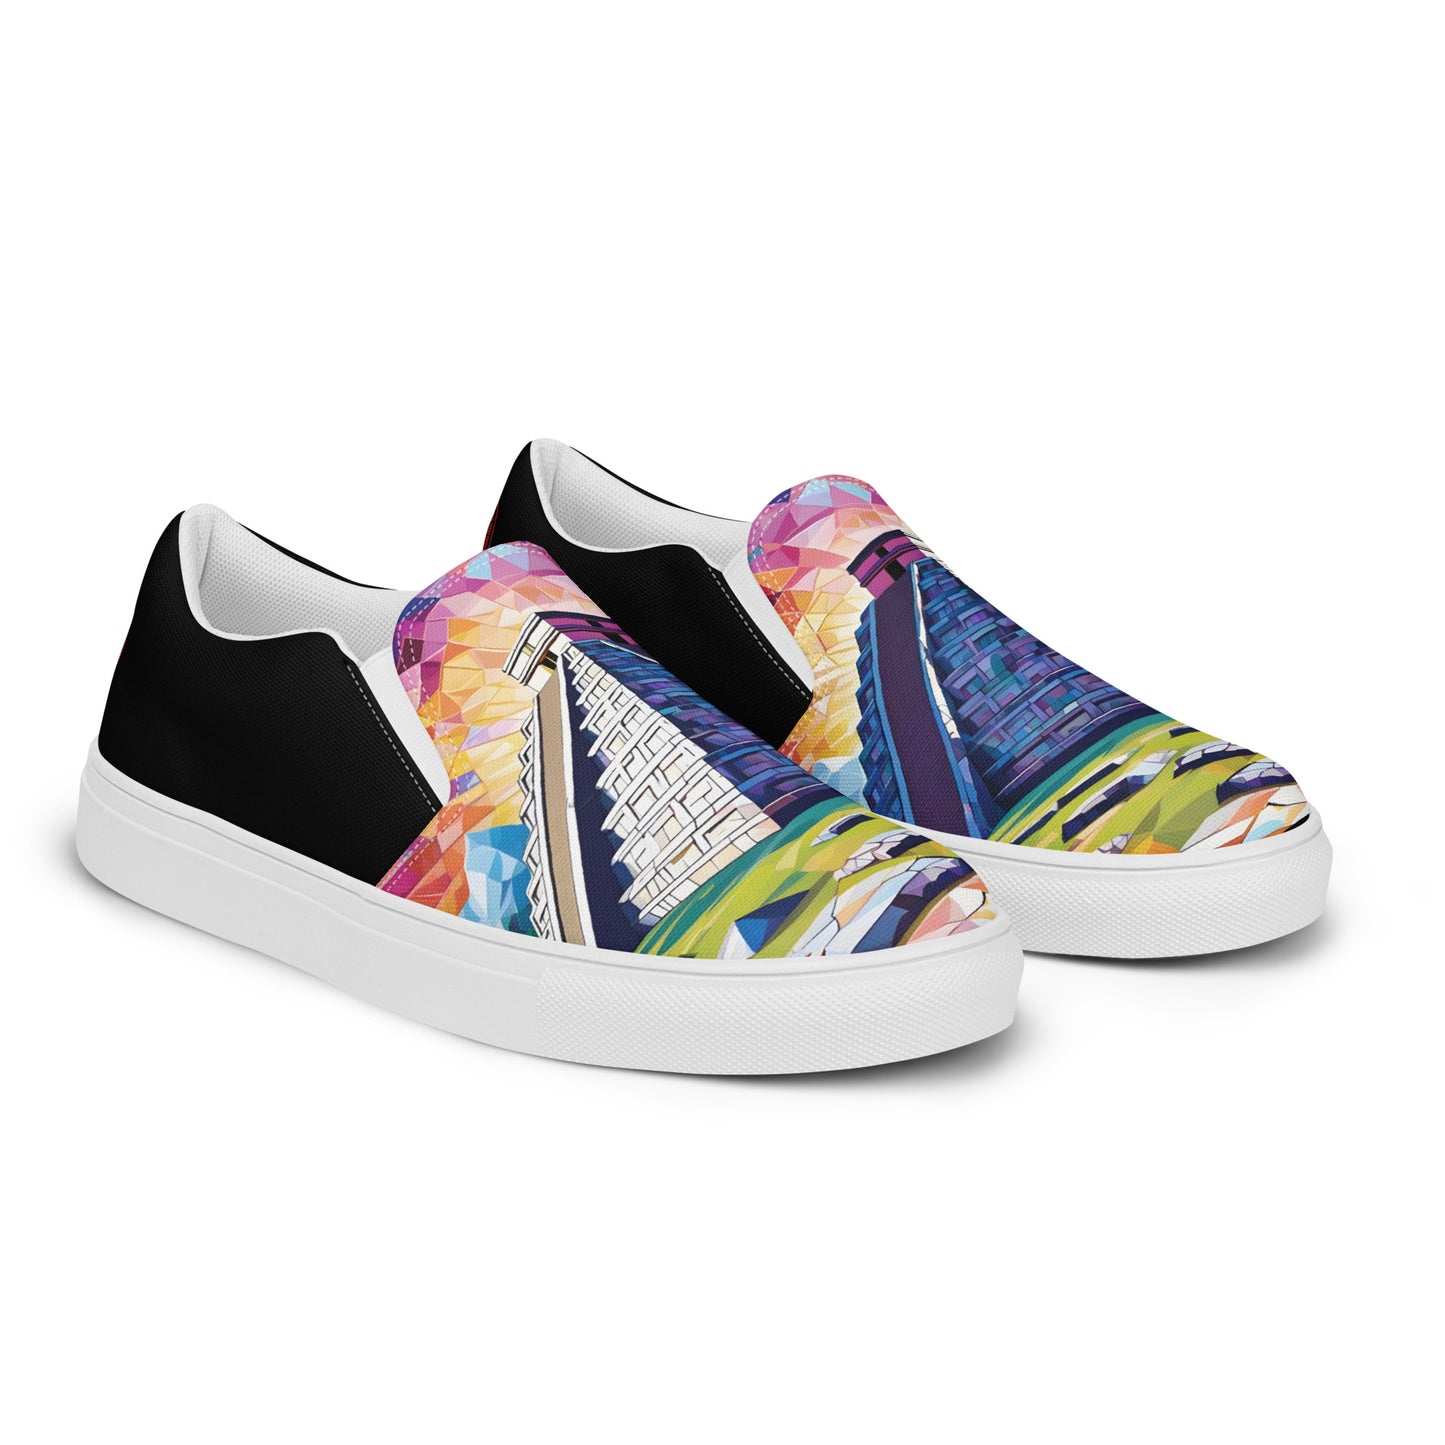 Chichén Itzá - Stained glass - Women - Black - Slip-on shoes